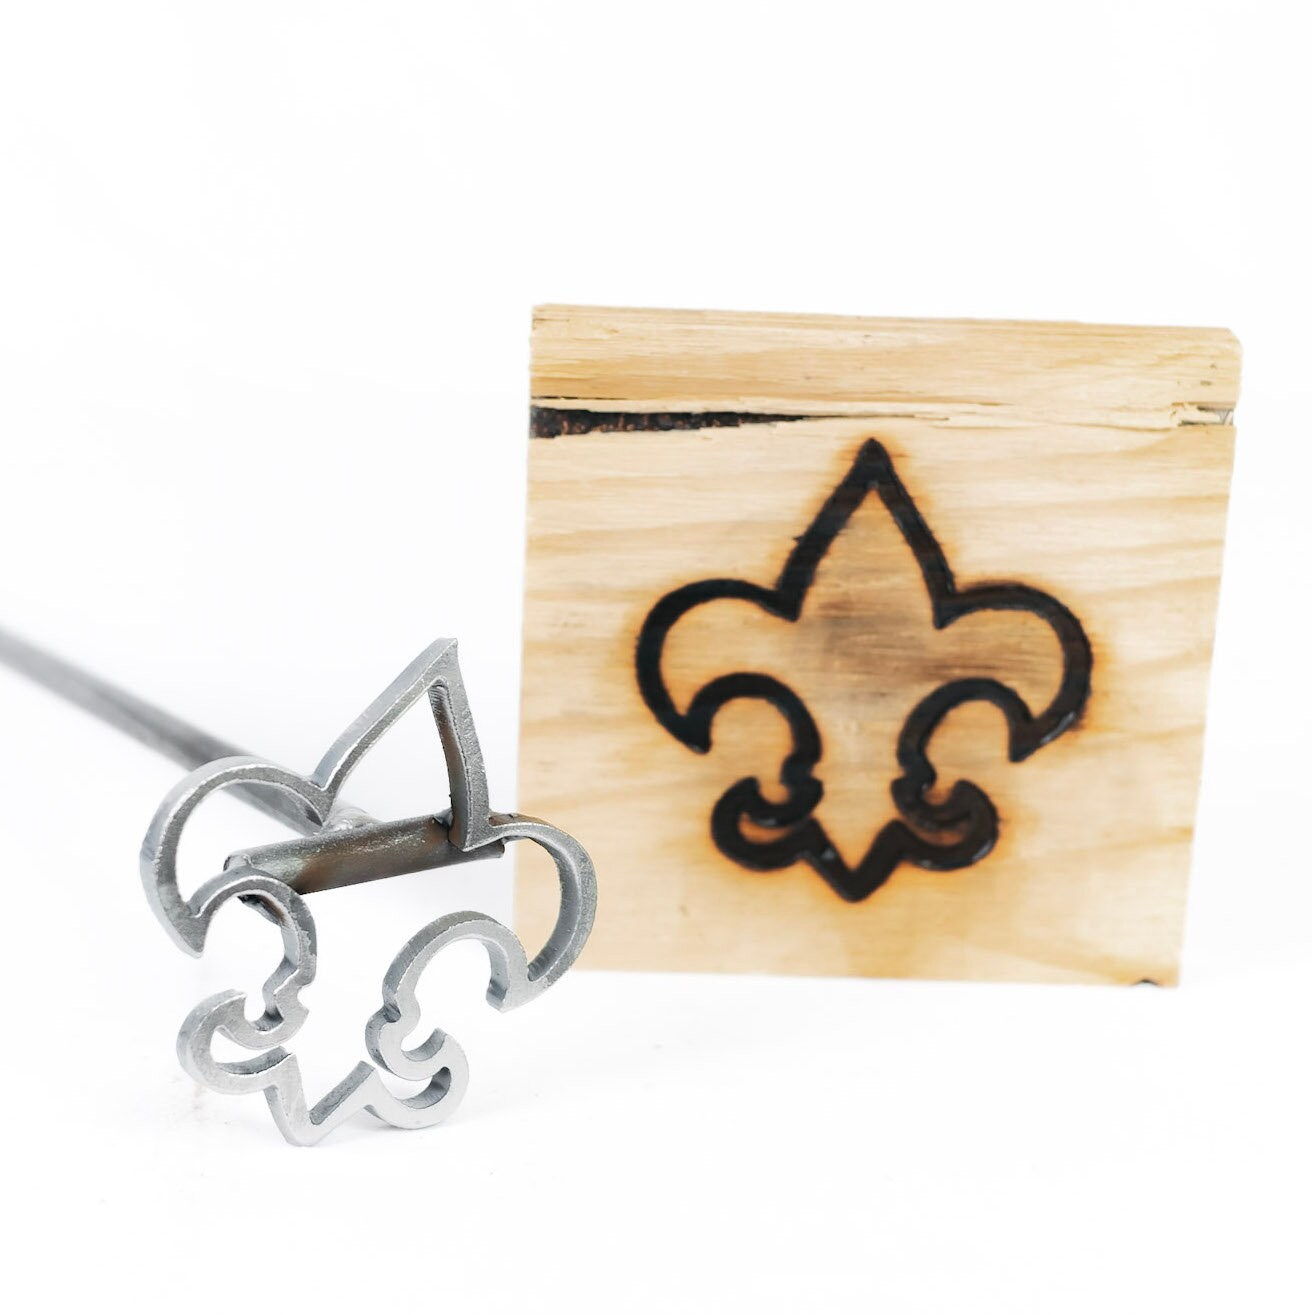 The Heritage Forge Crafts Fleur De Lis 4" Woodworking Projects BBQ 